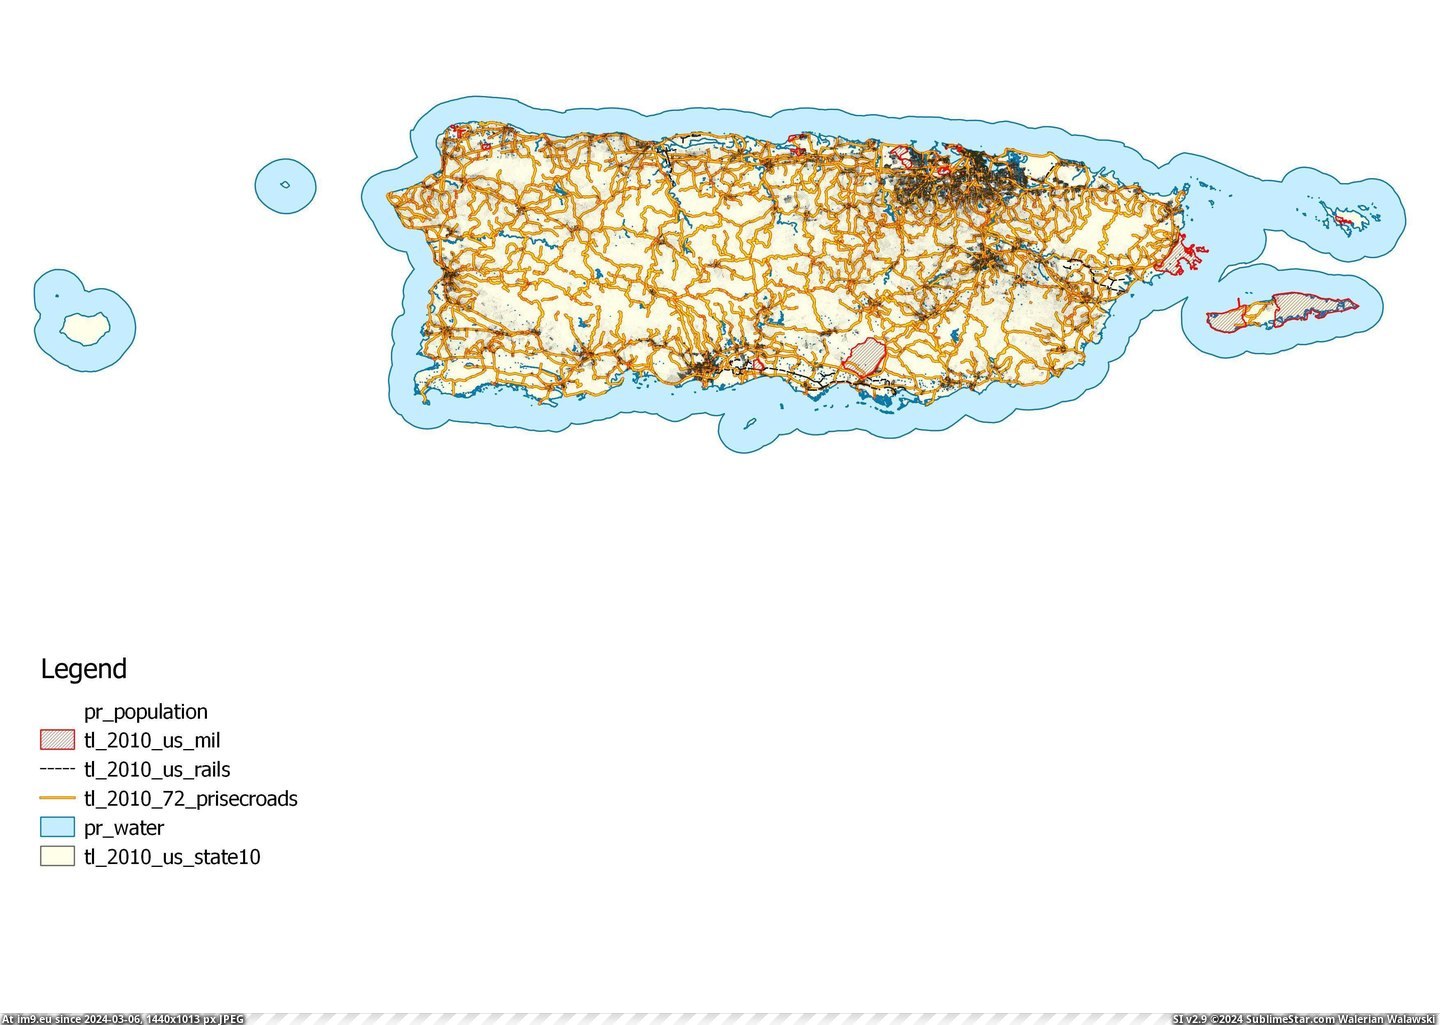 #Map #Population #Rico #Dot #Puerto [Mapporn] Population Dot Map Puerto Rico [3507x2480] Pic. (Image of album My r/MAPS favs))